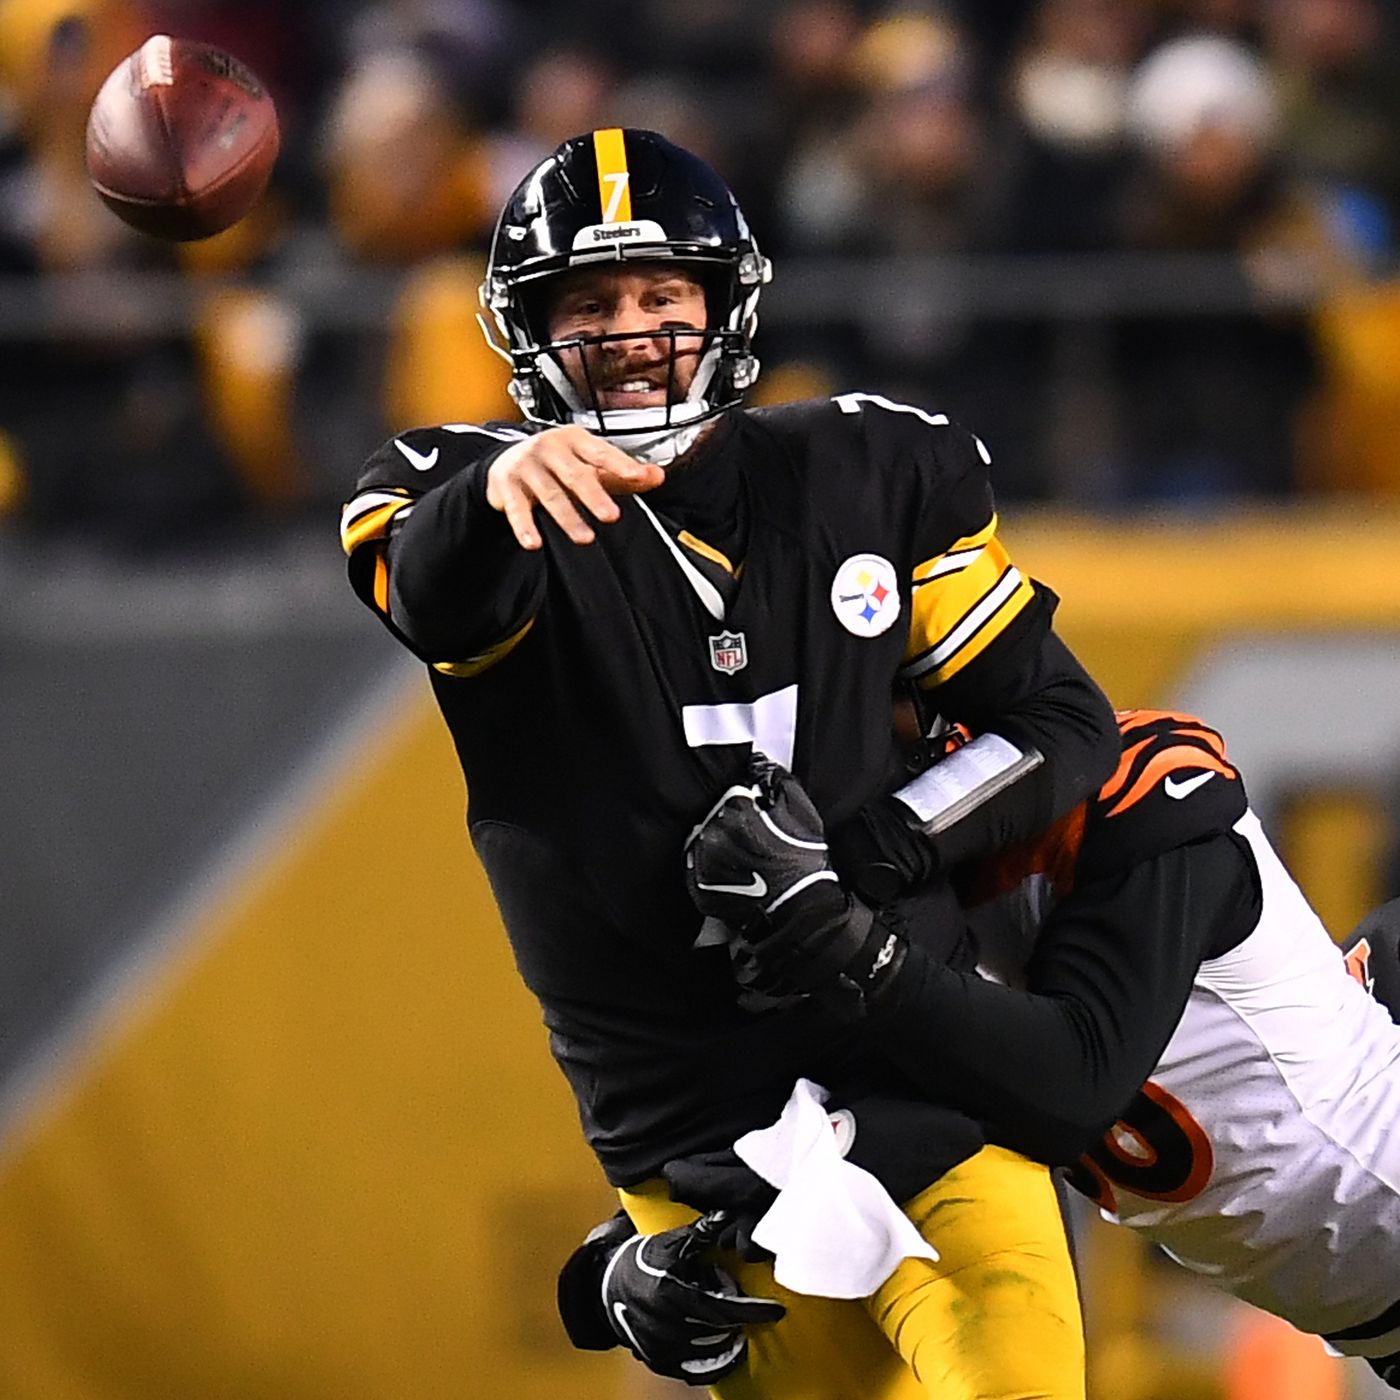 Questionable Article Puts Ben Roethlisberger In The Crosshairs